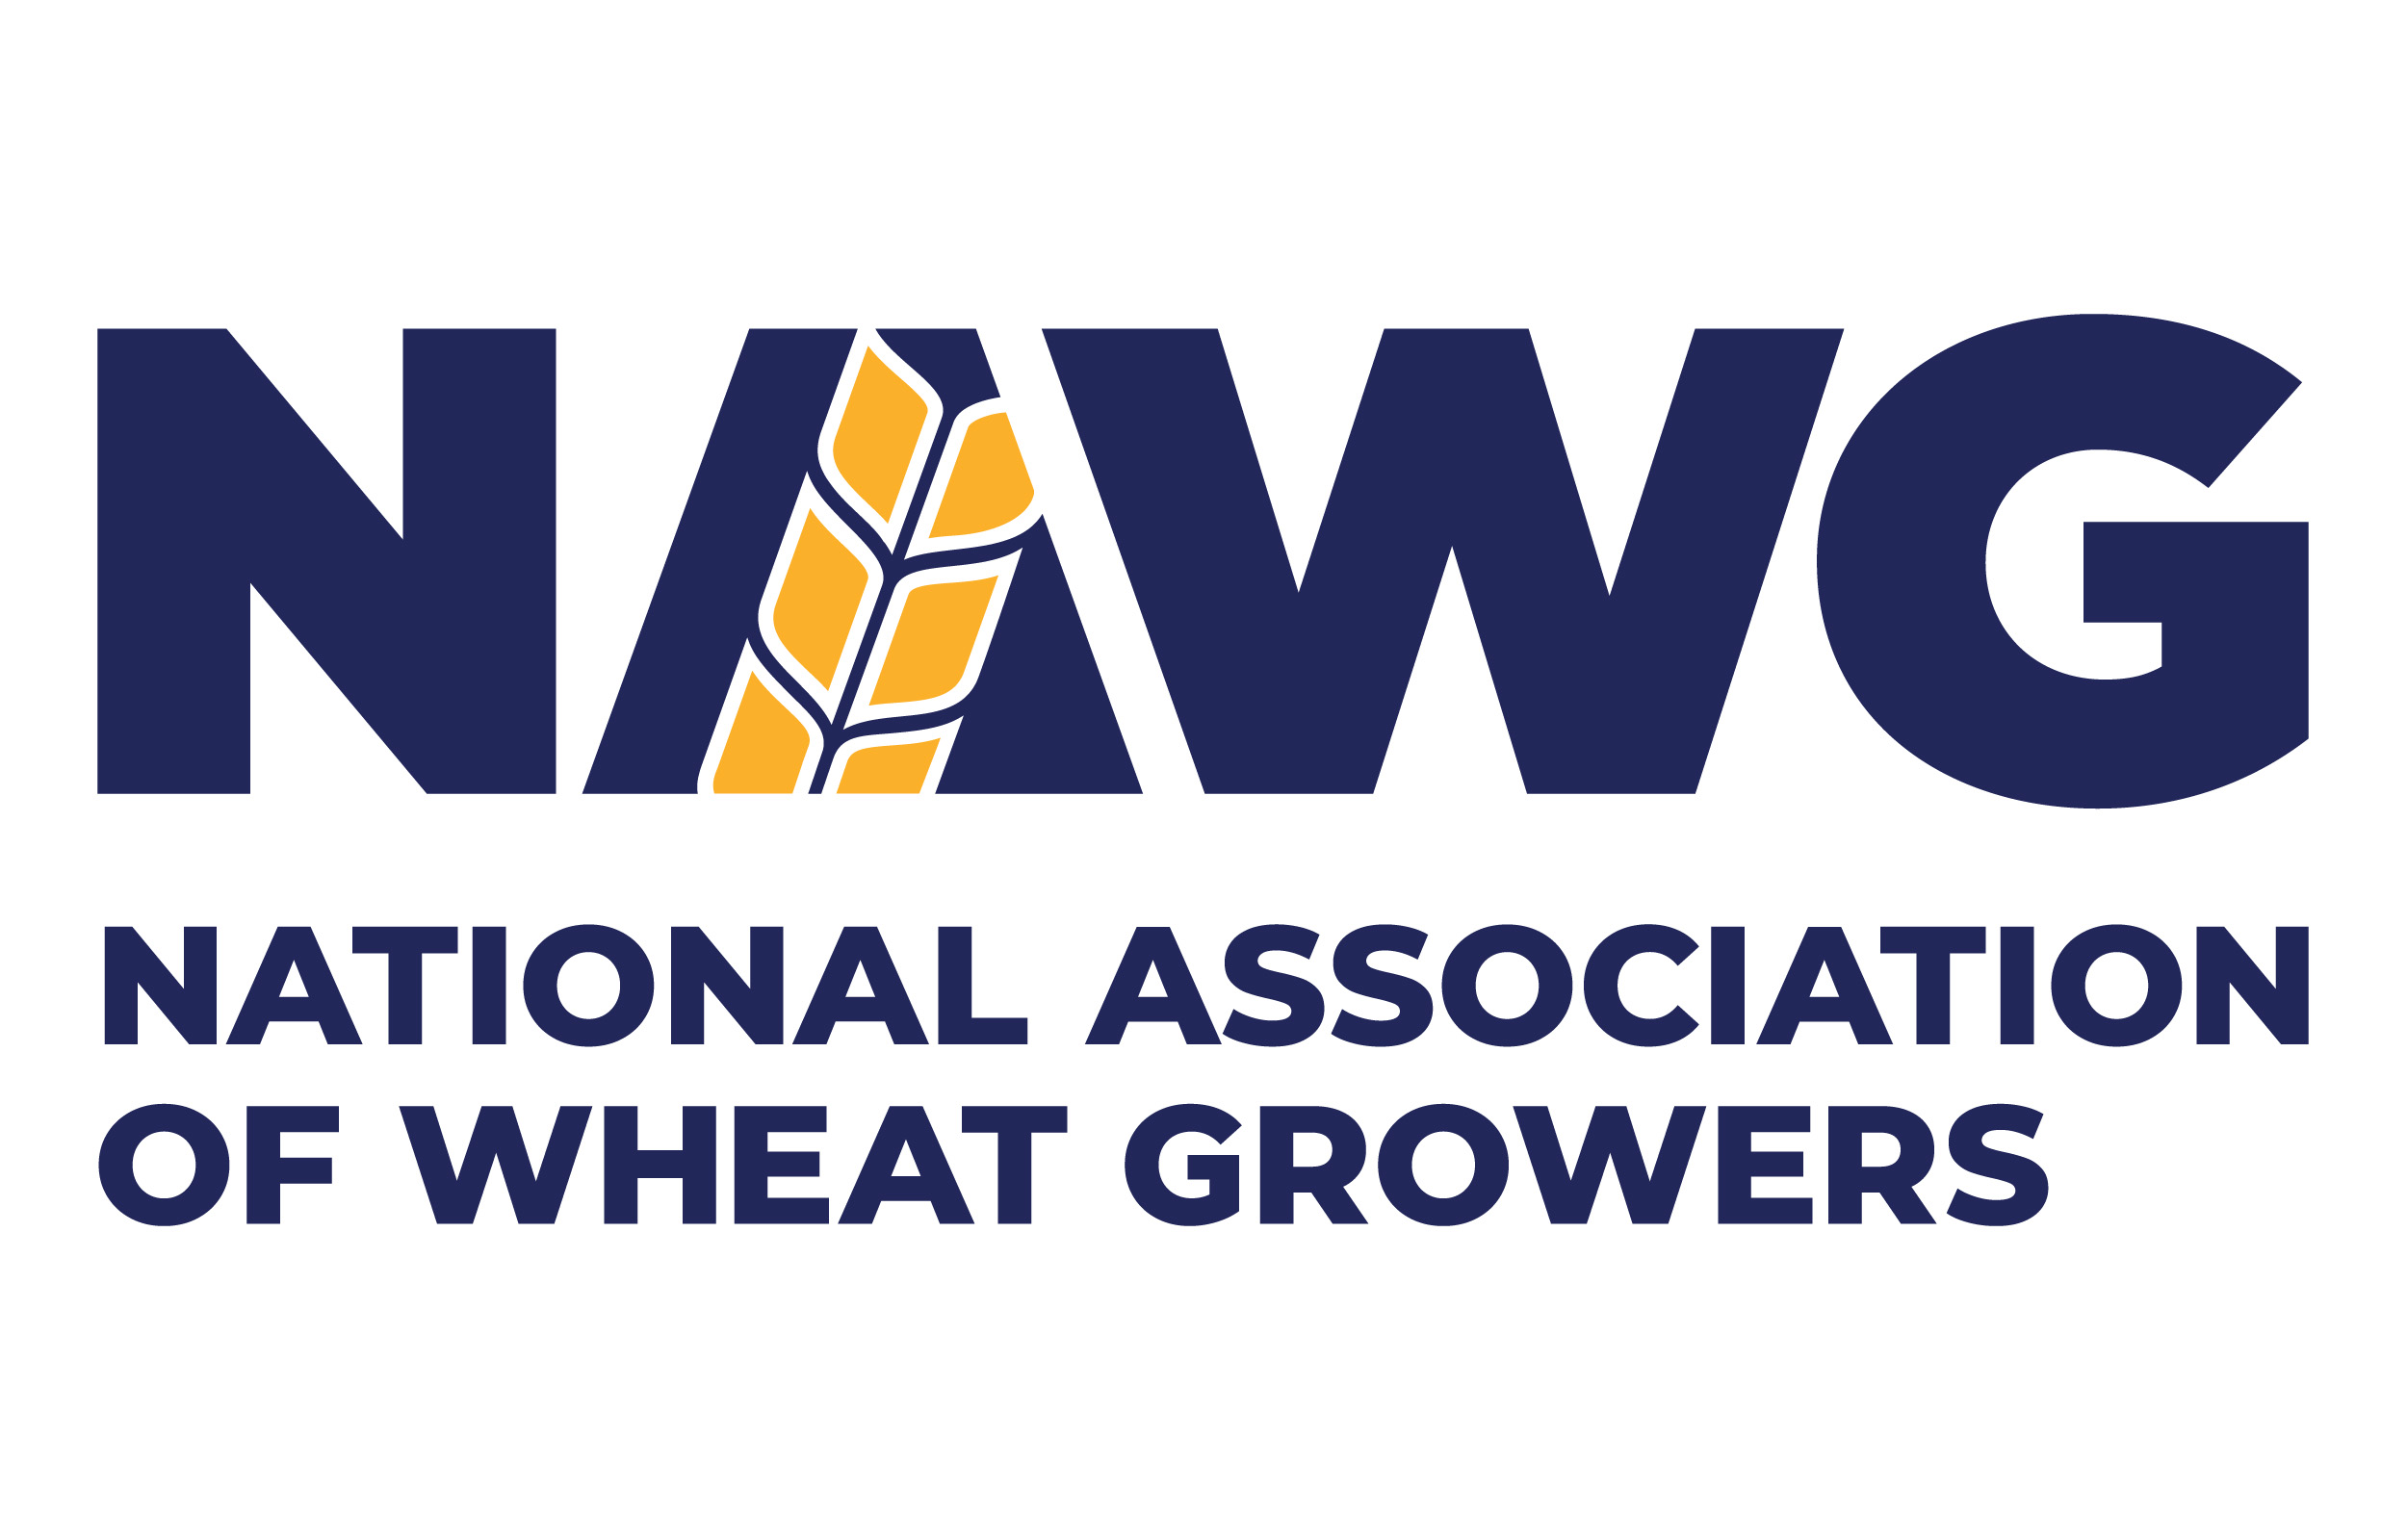 NAWG │ National Association of Wheat Growers